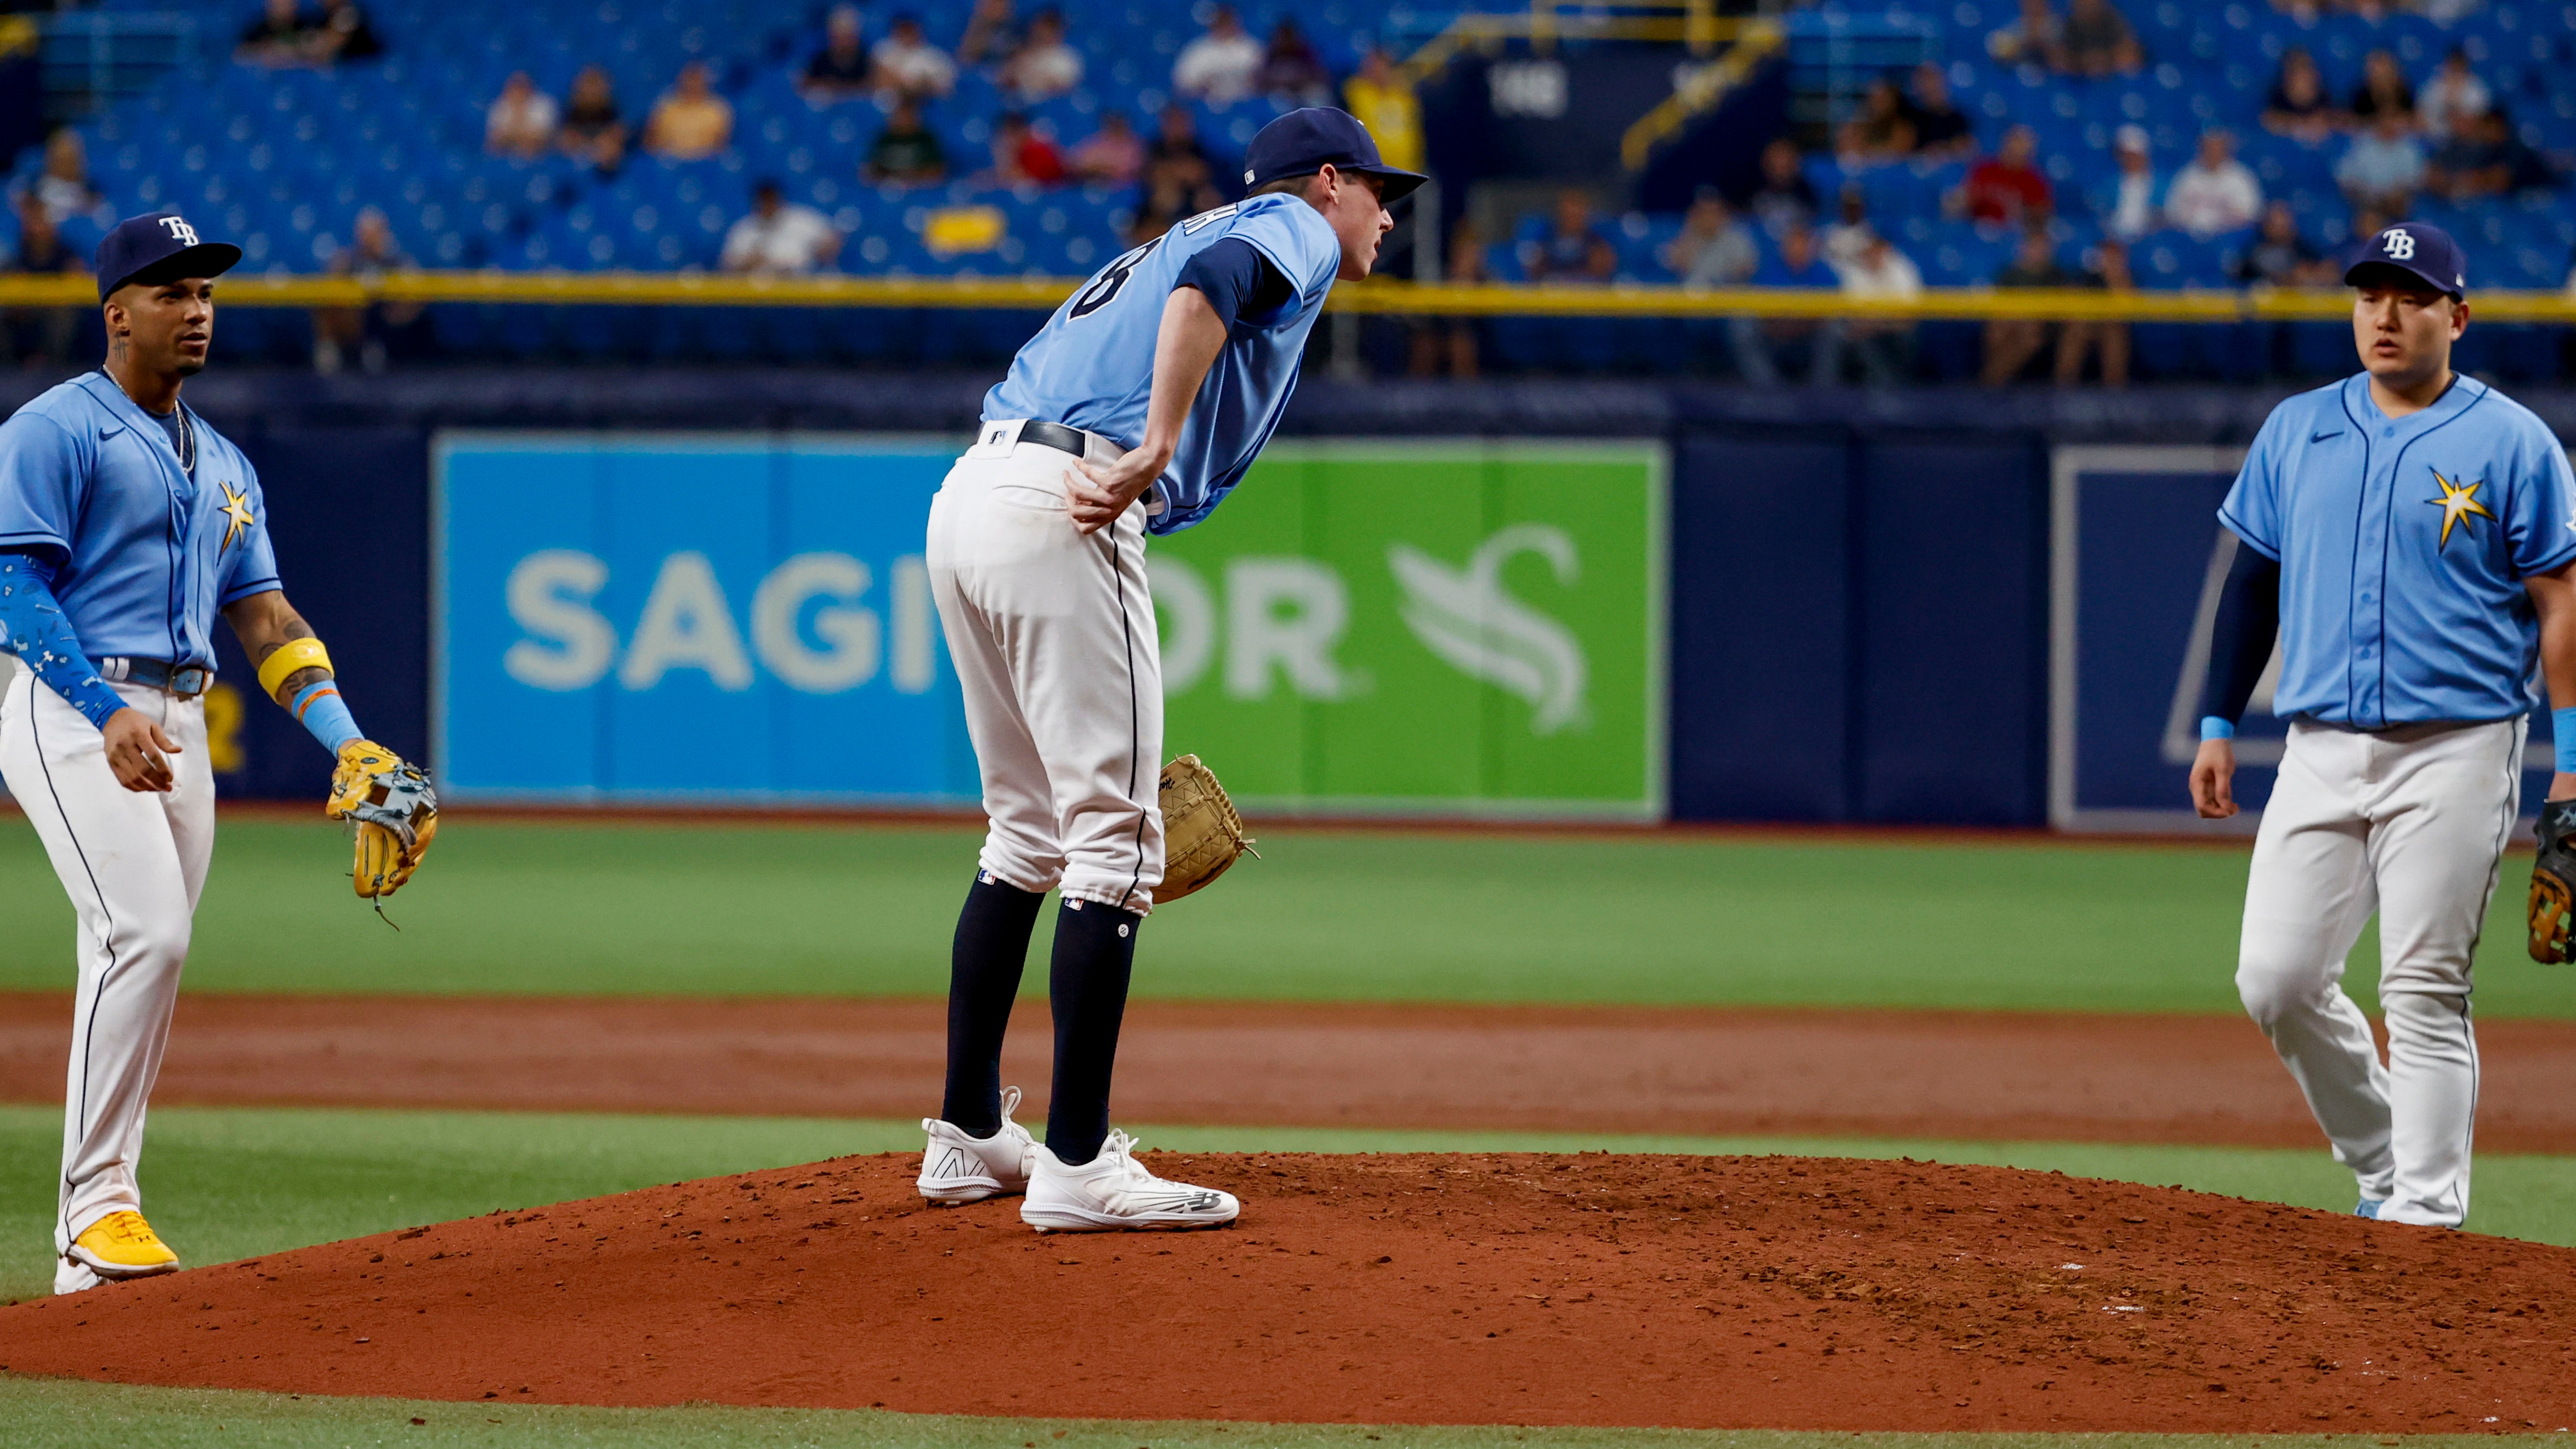 Tampa Bay Rays projected lineup: Batting order, starting pitcher